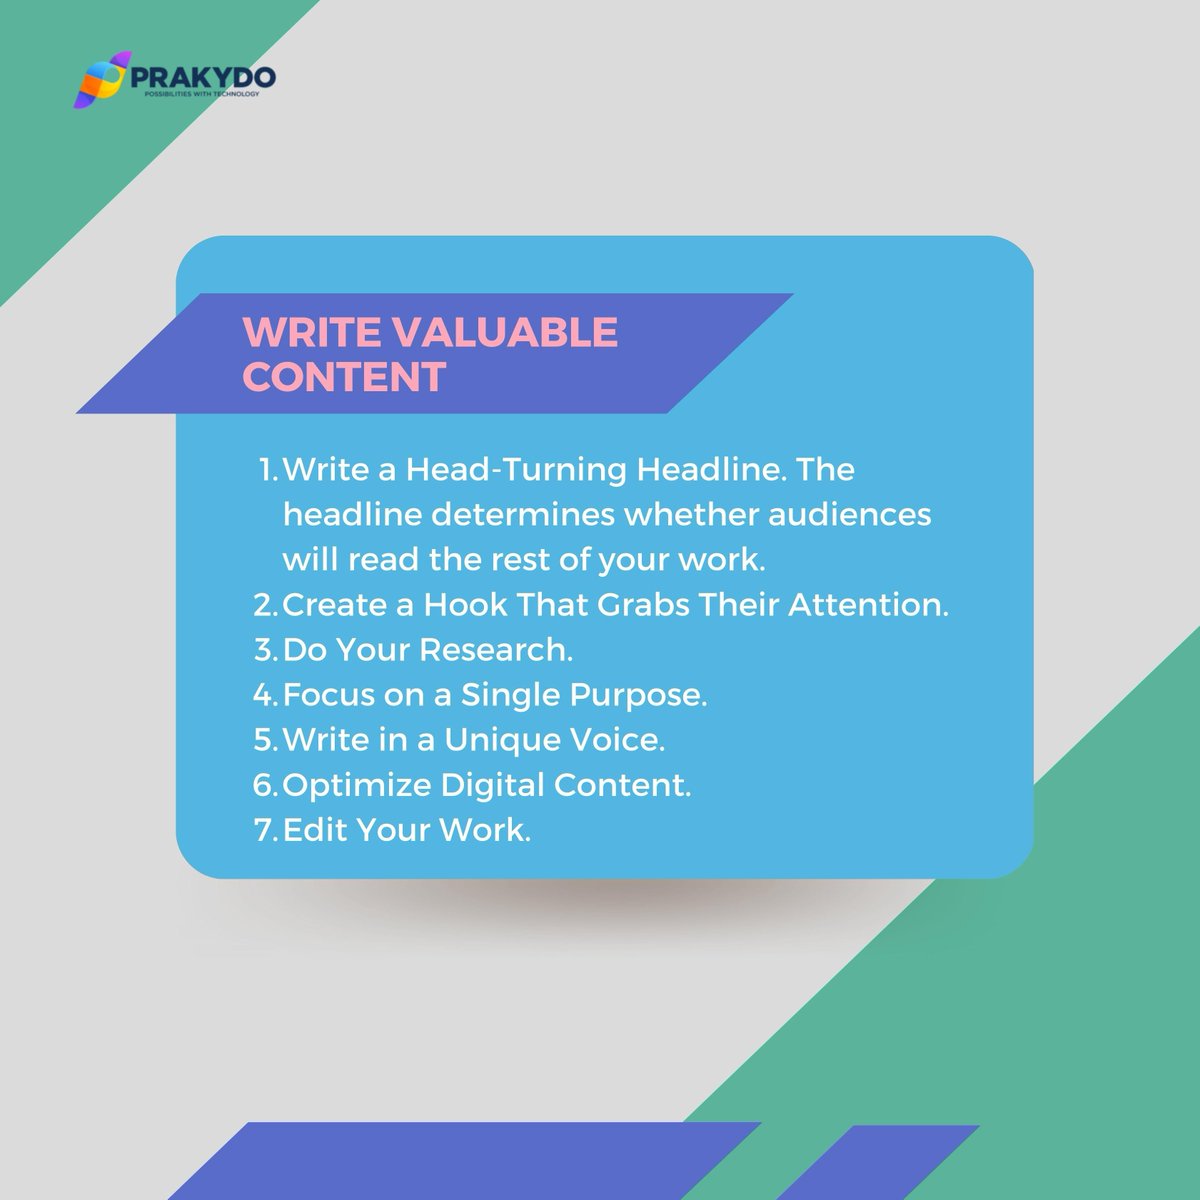 While writing something for the readers to read your content, make sure it has unique voice in it and has a single purpose to focus. The highlight part of your content should be the editing skills and the headline to attract the other person. #marketingdigital #digitalmarketing